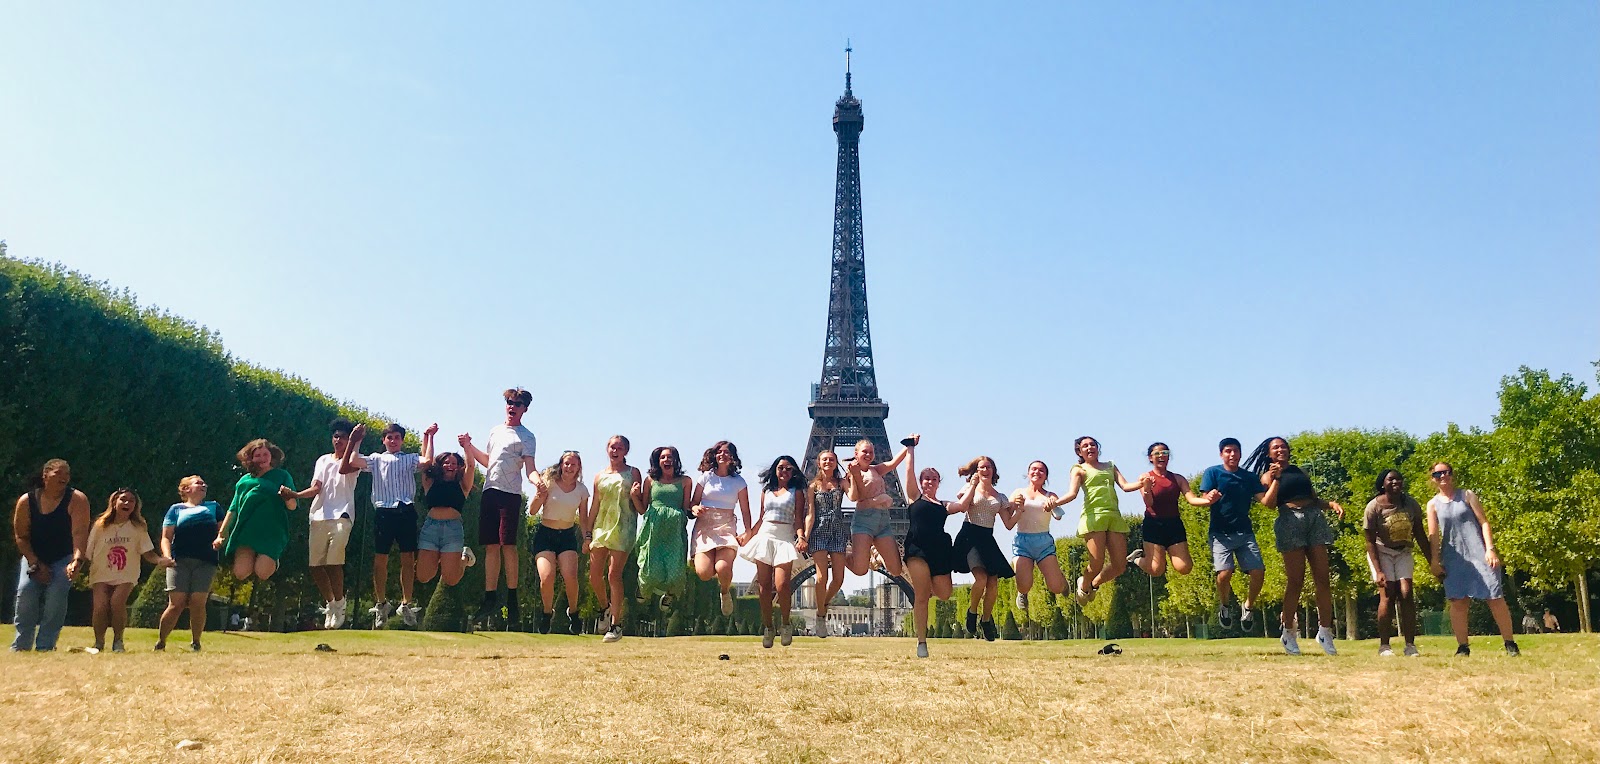 Students hold hands and jump with the Eiffel Tower in the background